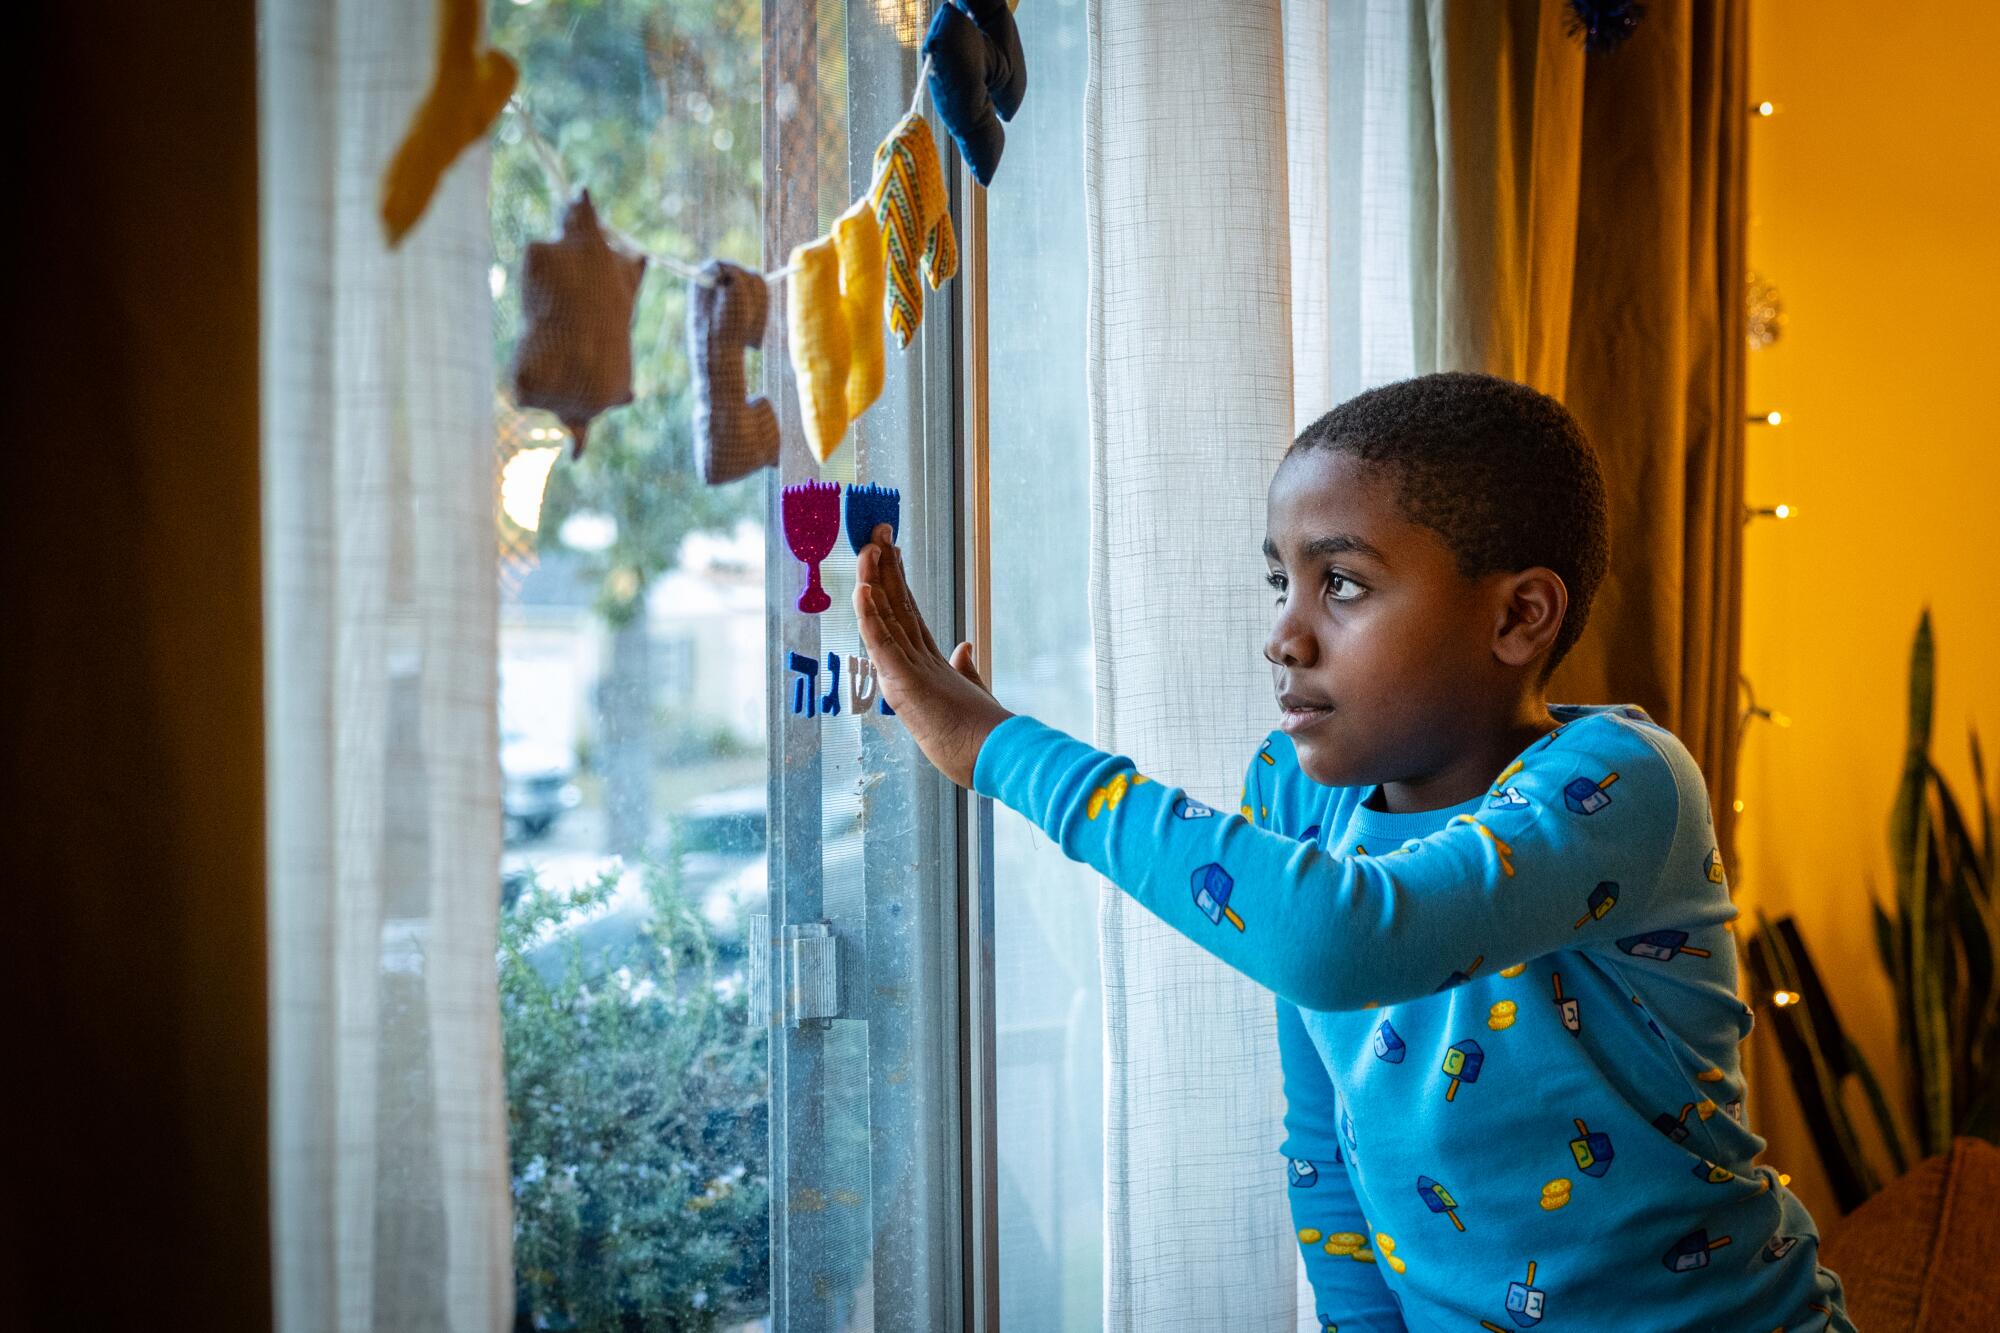 A boy places decorations in a window.